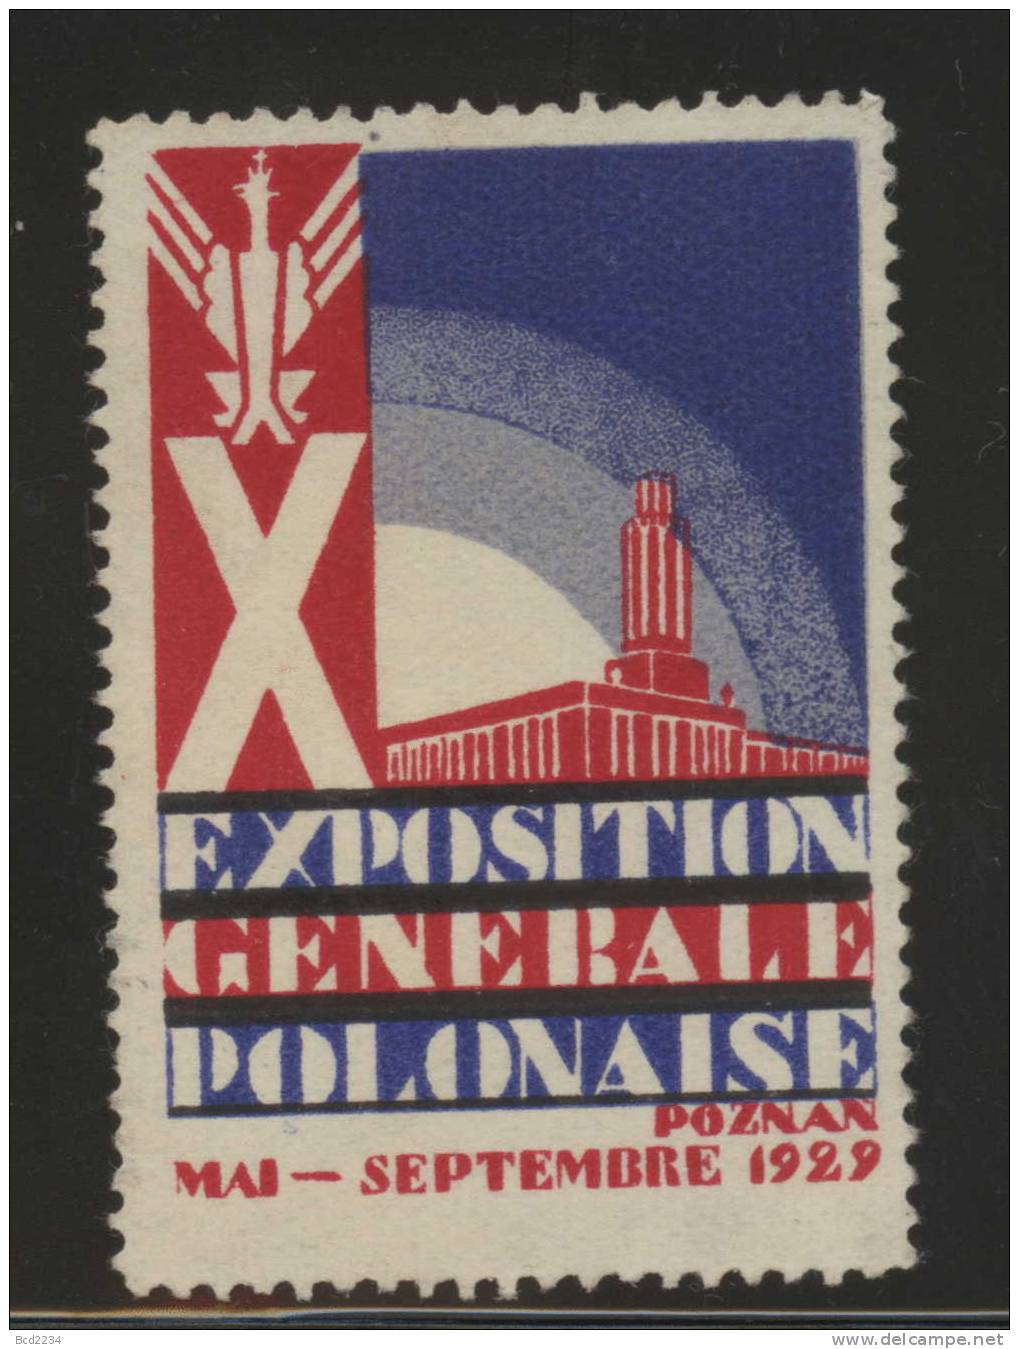 POLAND 1929 POZNAN EXHIBITION TRADE FAIR POSTER STAMP TYPE 5 FRENCH WRITING NO GUM - Fiscale Zegels